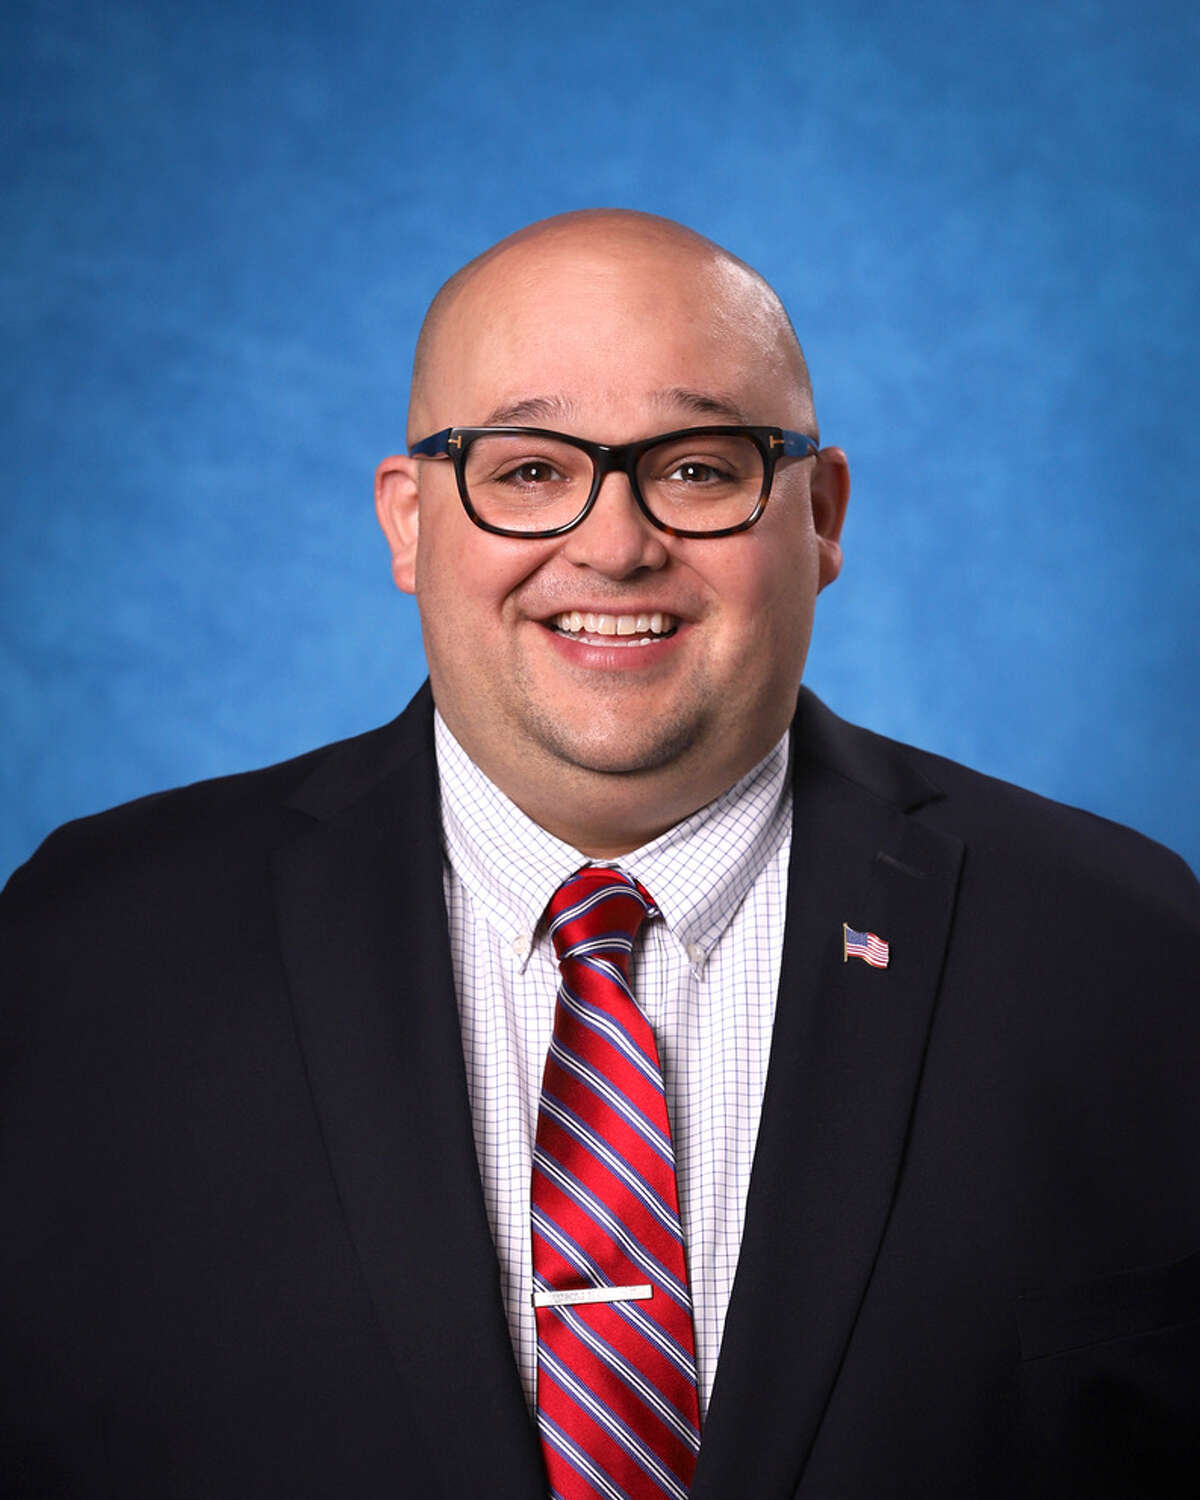 Michael E. Gonzalez recently left the Laredo area to become the associate of operations and stakeholder relations for the Texas Southwest Small Business Development Center Network at the University of Texas at San Antonio (UTSA).